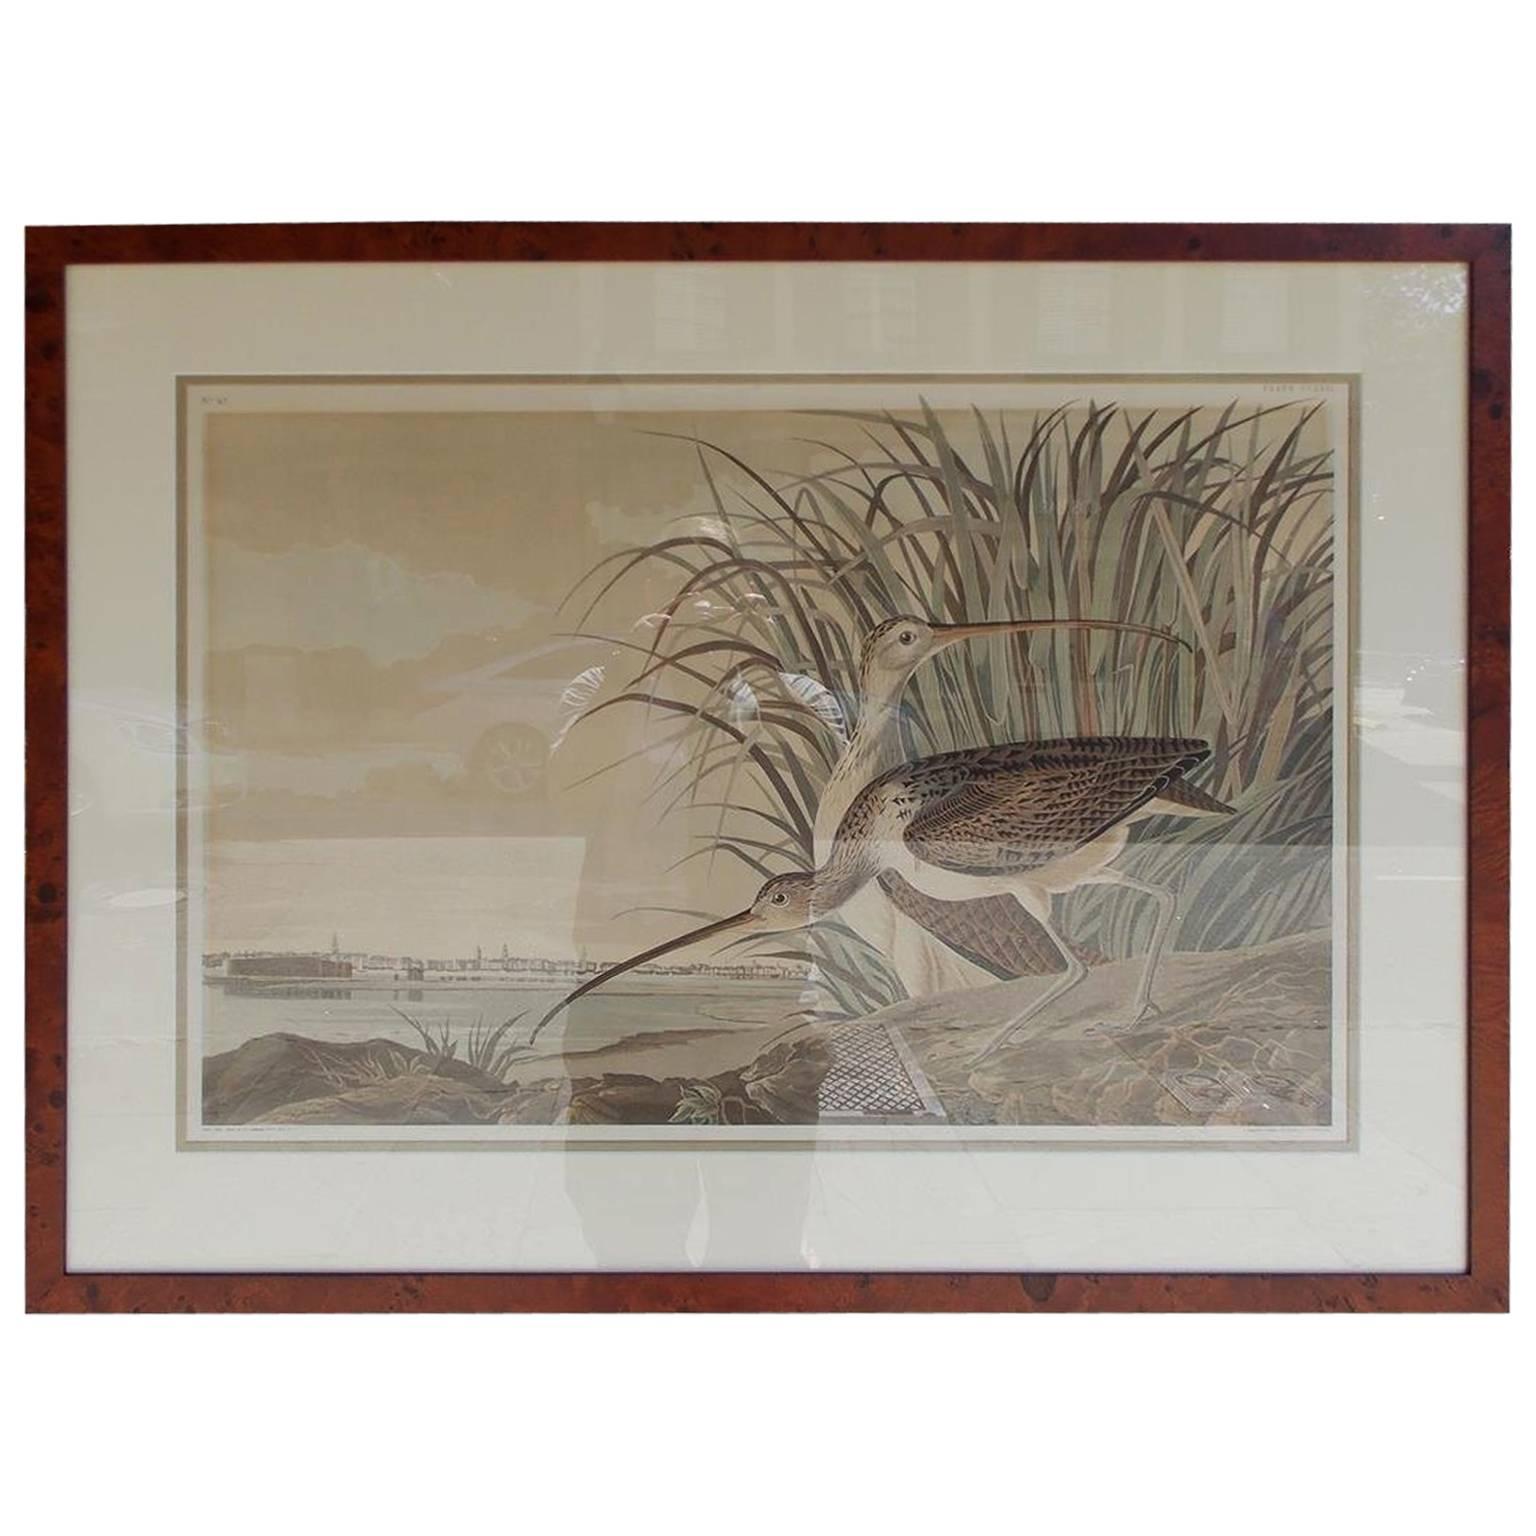 American Audubon Hand Colored Lithograph, Long Billed Curlew, Circa 1937